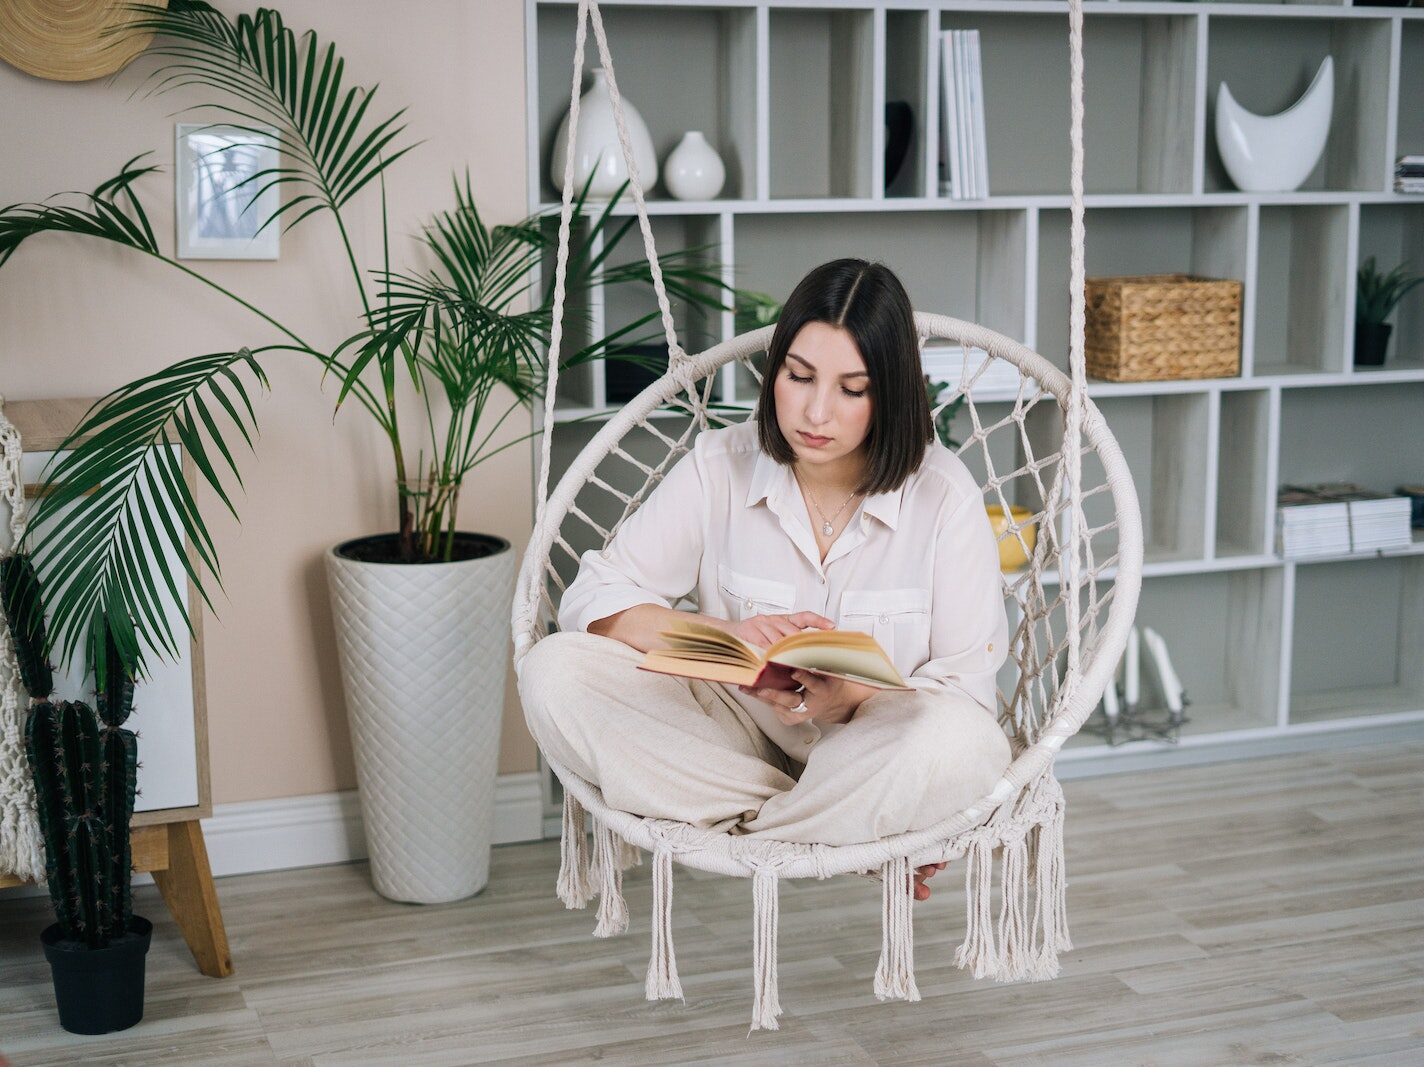 Woman in White Long Sleeve Shirt Sitting on White Wicker Chair